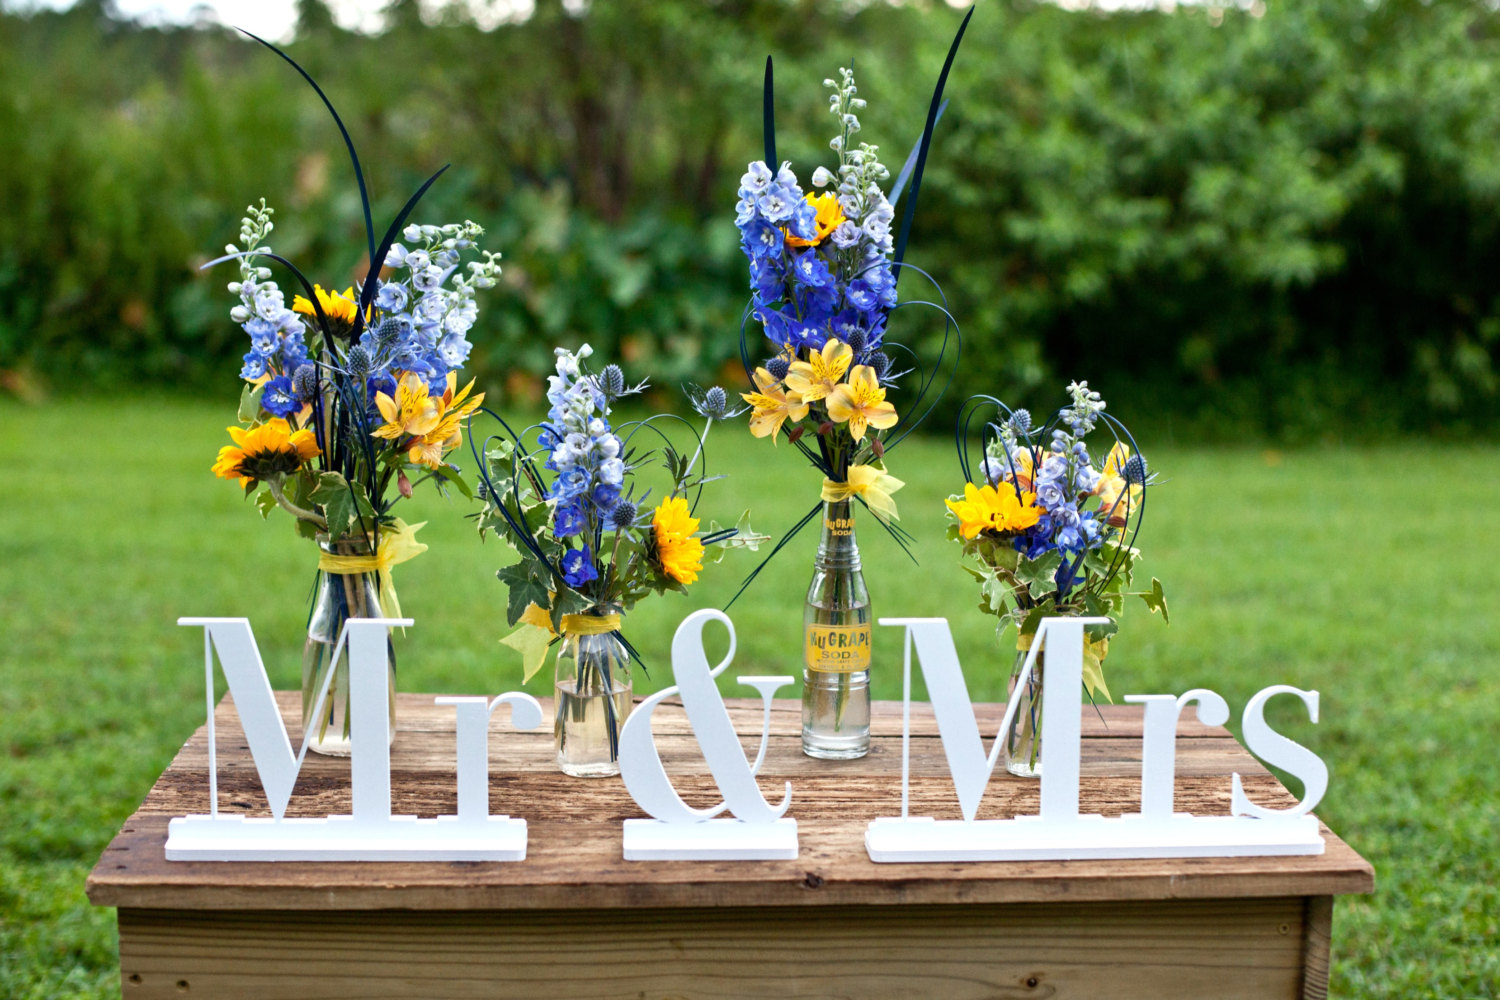 mr and mrs signage | via bride and groom chair signs https://emmalinebride.com/decor/bride-and-groom-chairs/